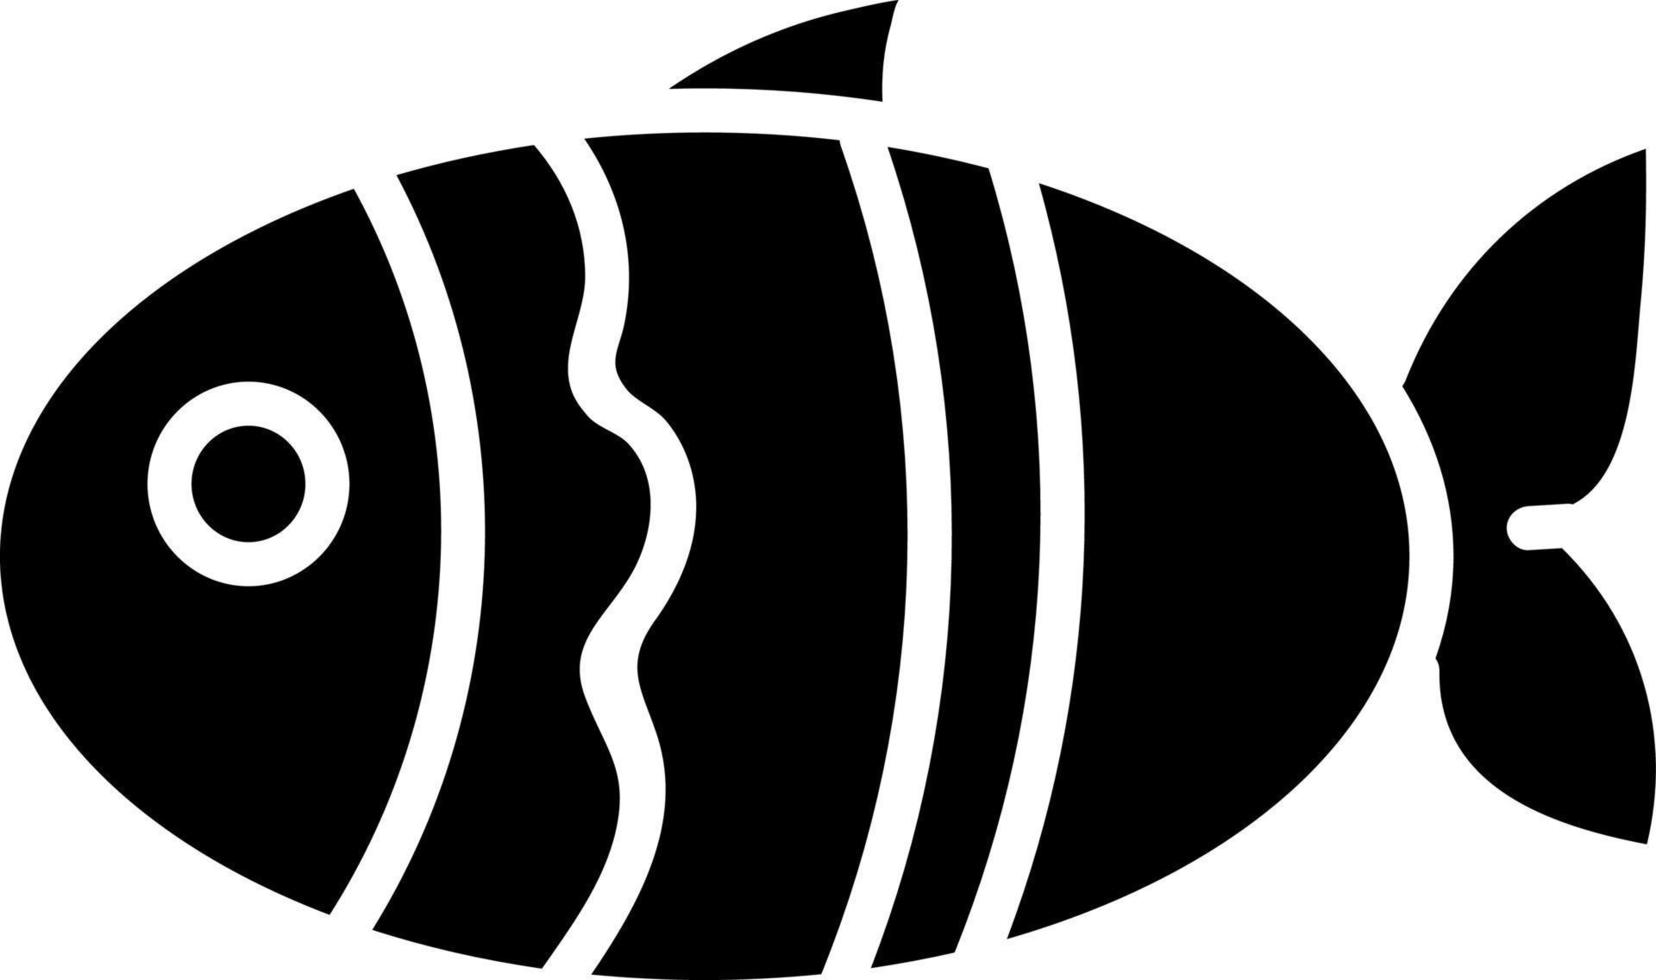 Fish with stripes, illustration, vector on white background.